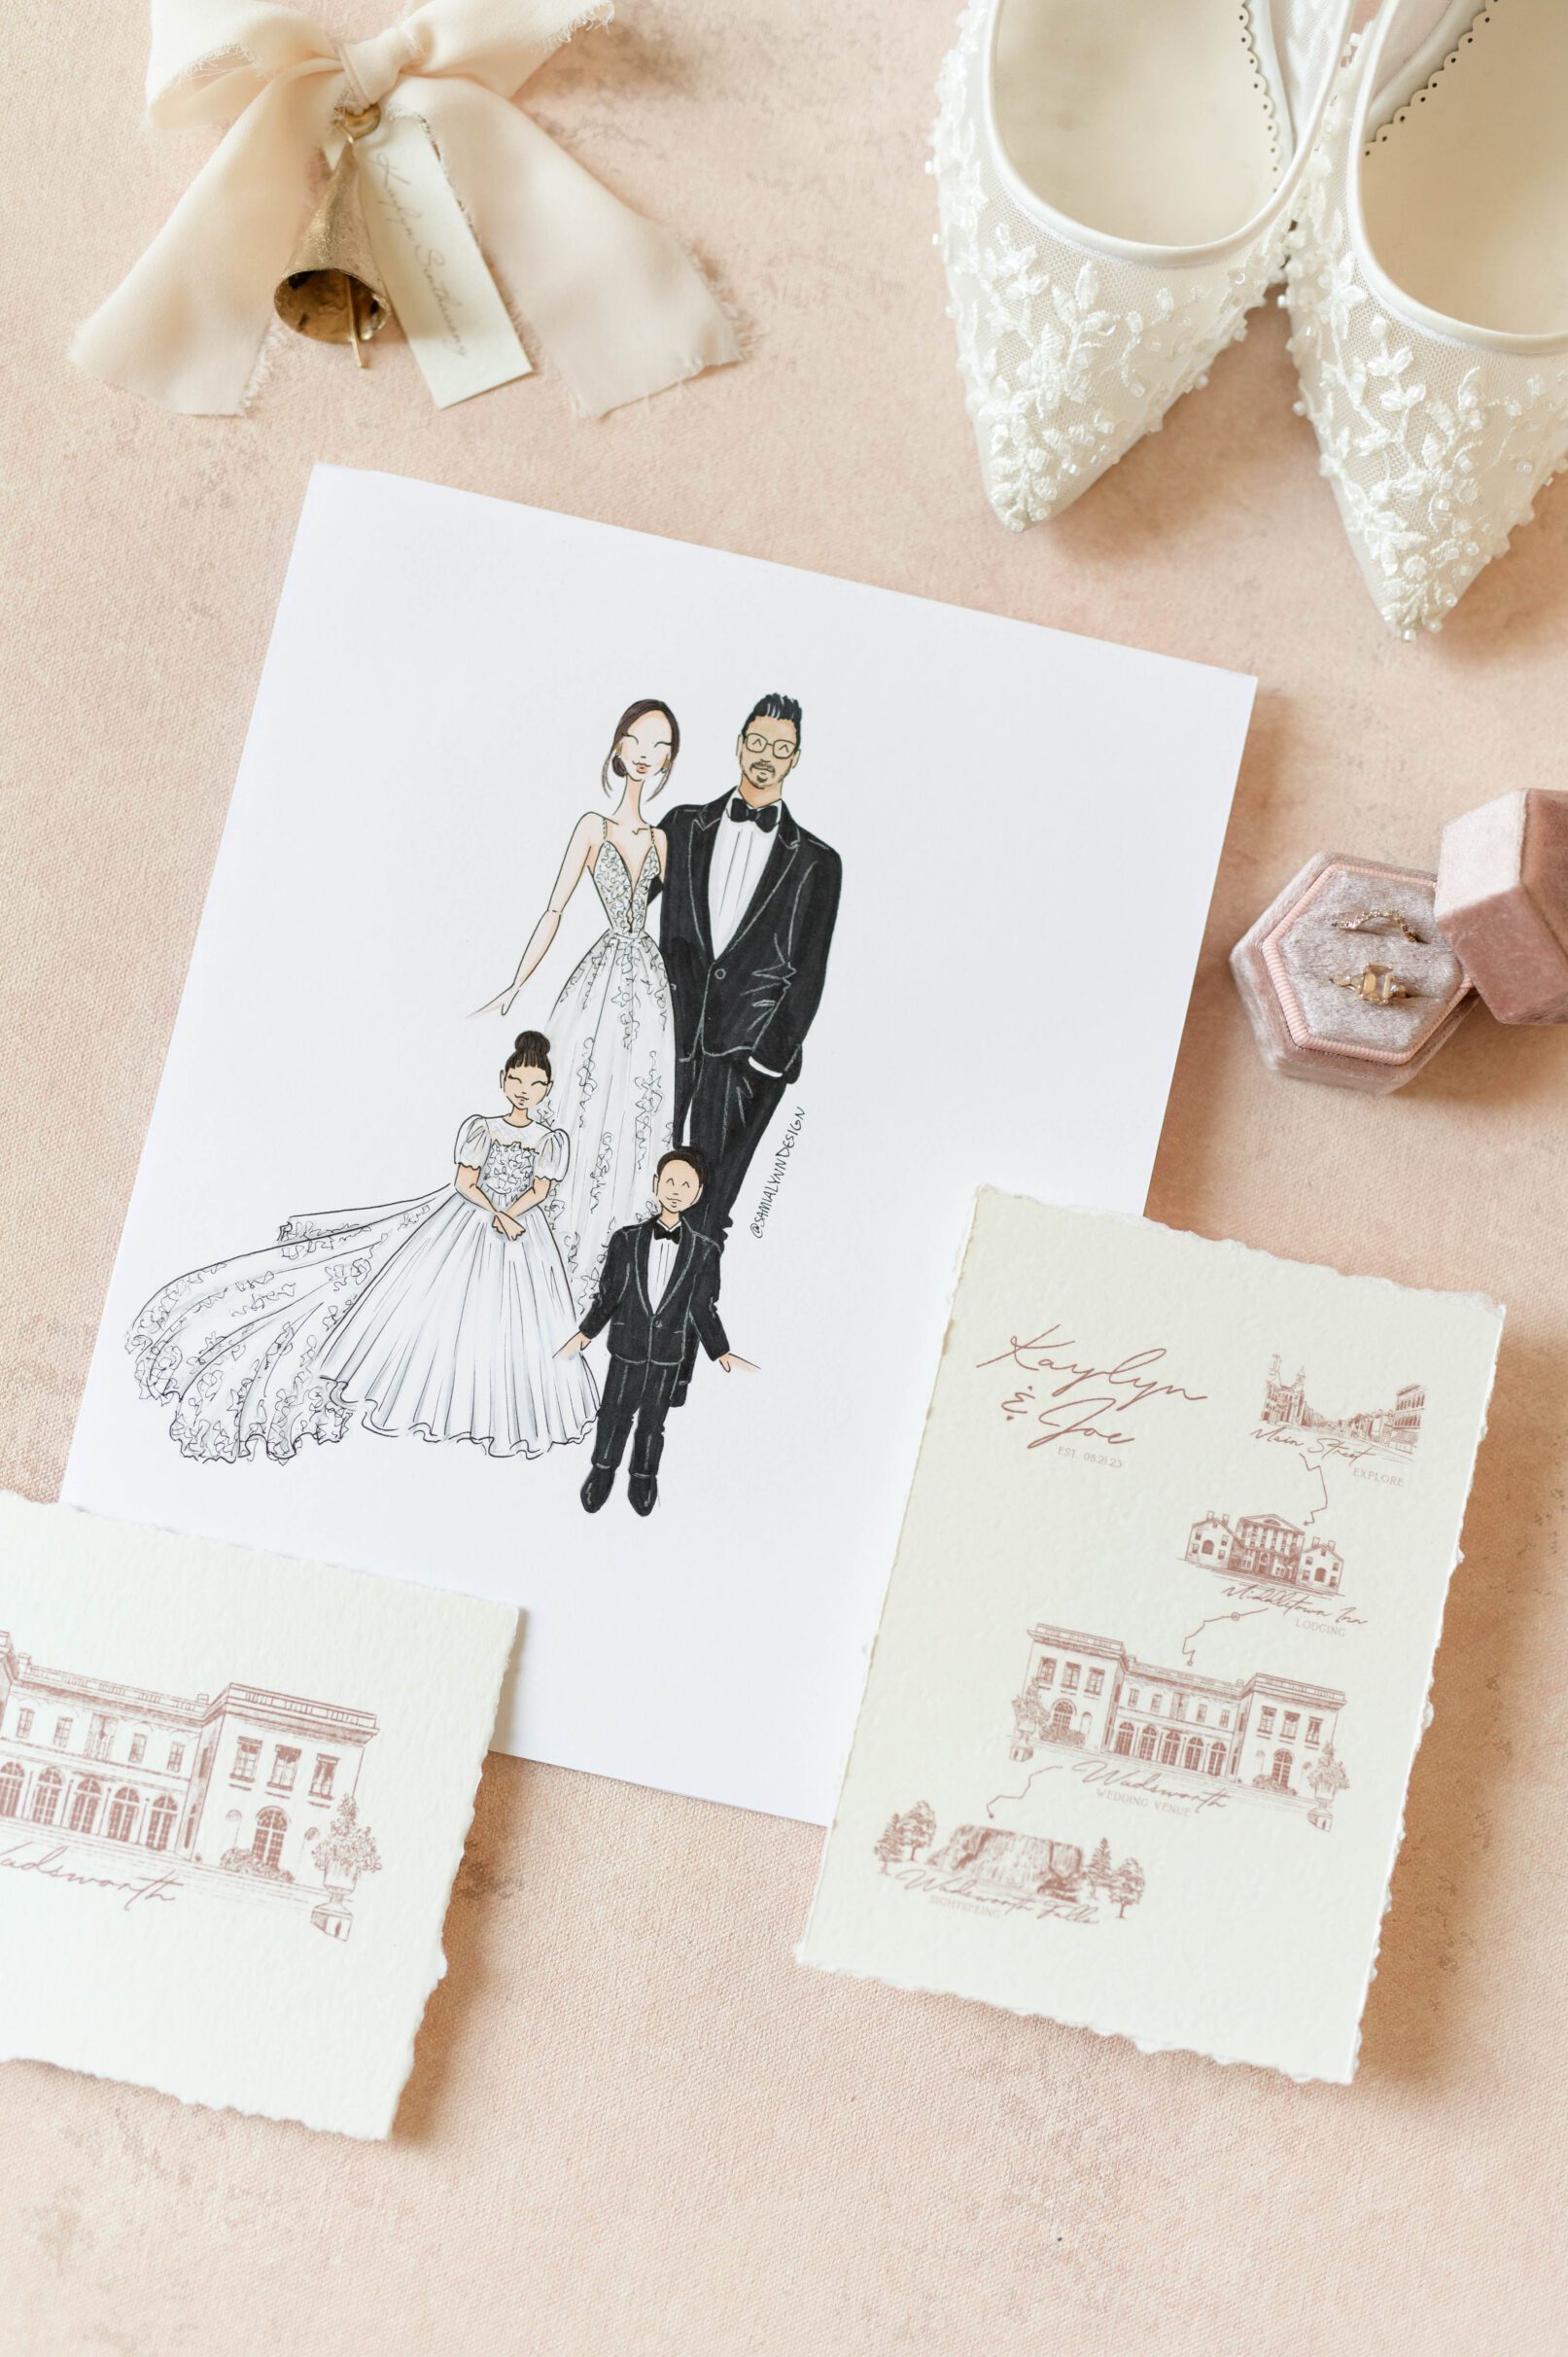 Boston guest illustrator drawing of bride and groom in flatlay